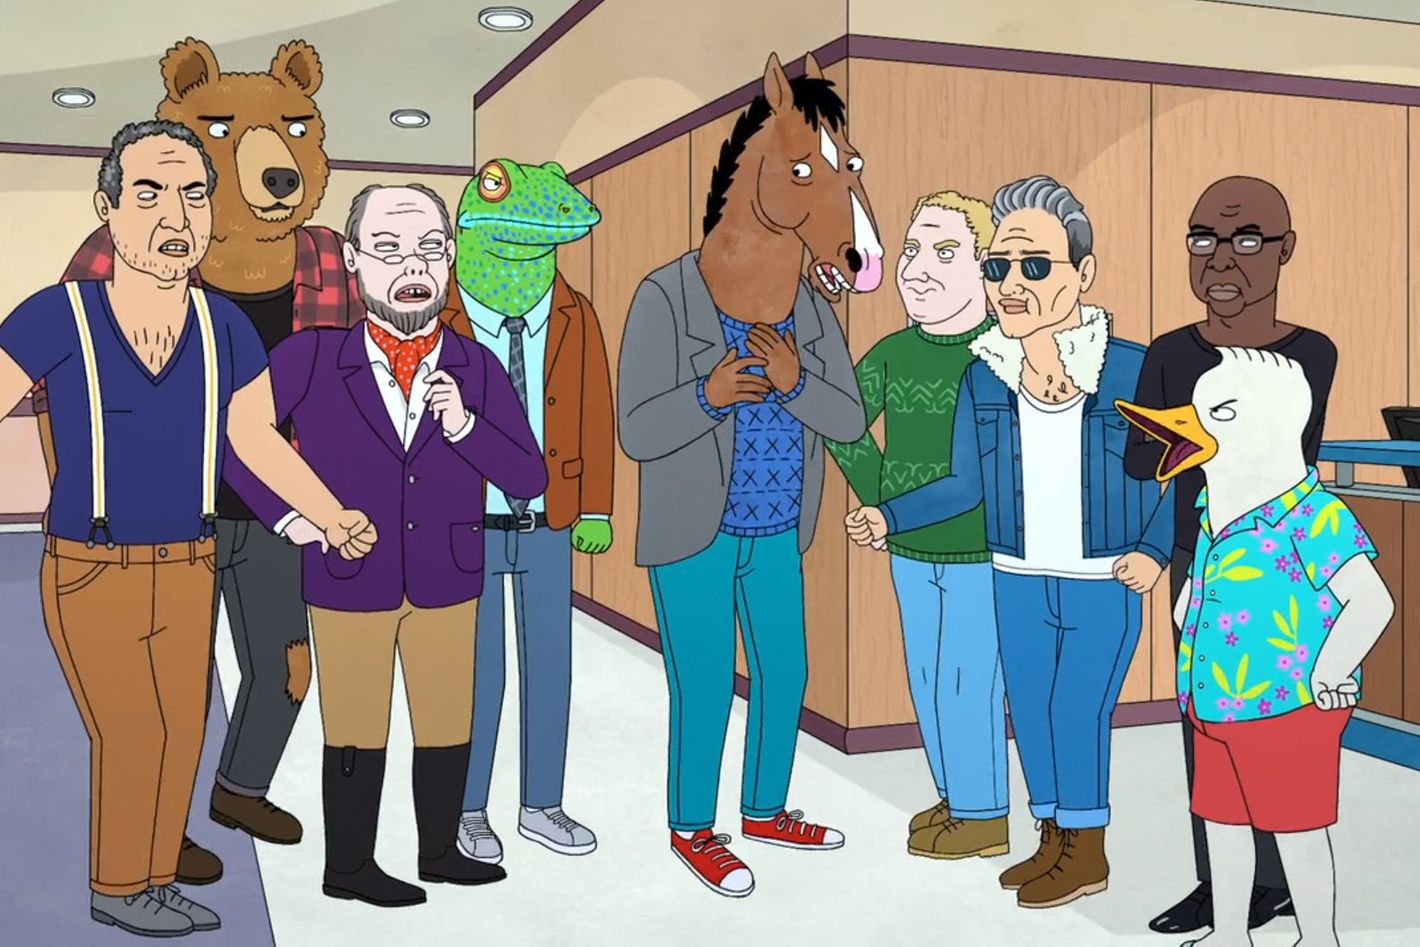 Apologies if this has been posted before, but oh my God I think I found the  inspiration for Bojack's nude portrait. : r/BoJackHorseman